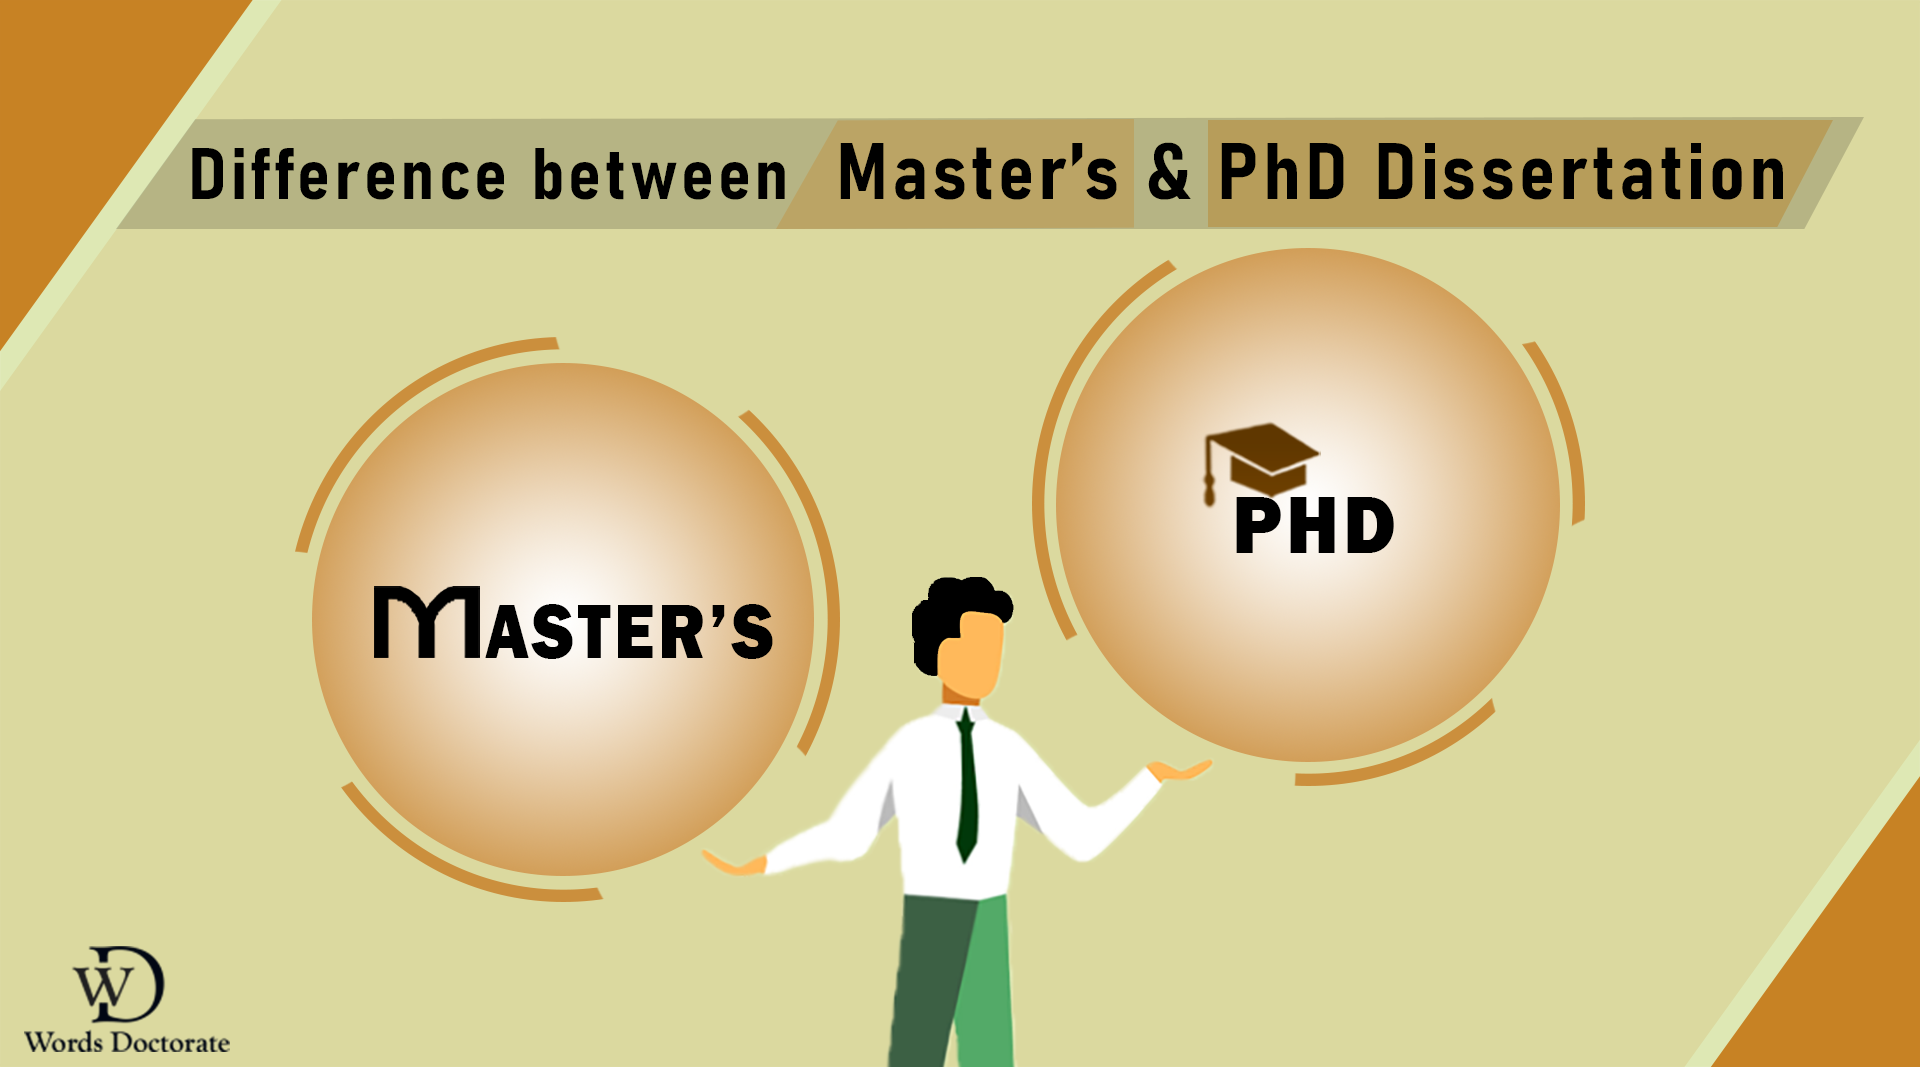 Dissertation vs Thesis: The Differences that Matter